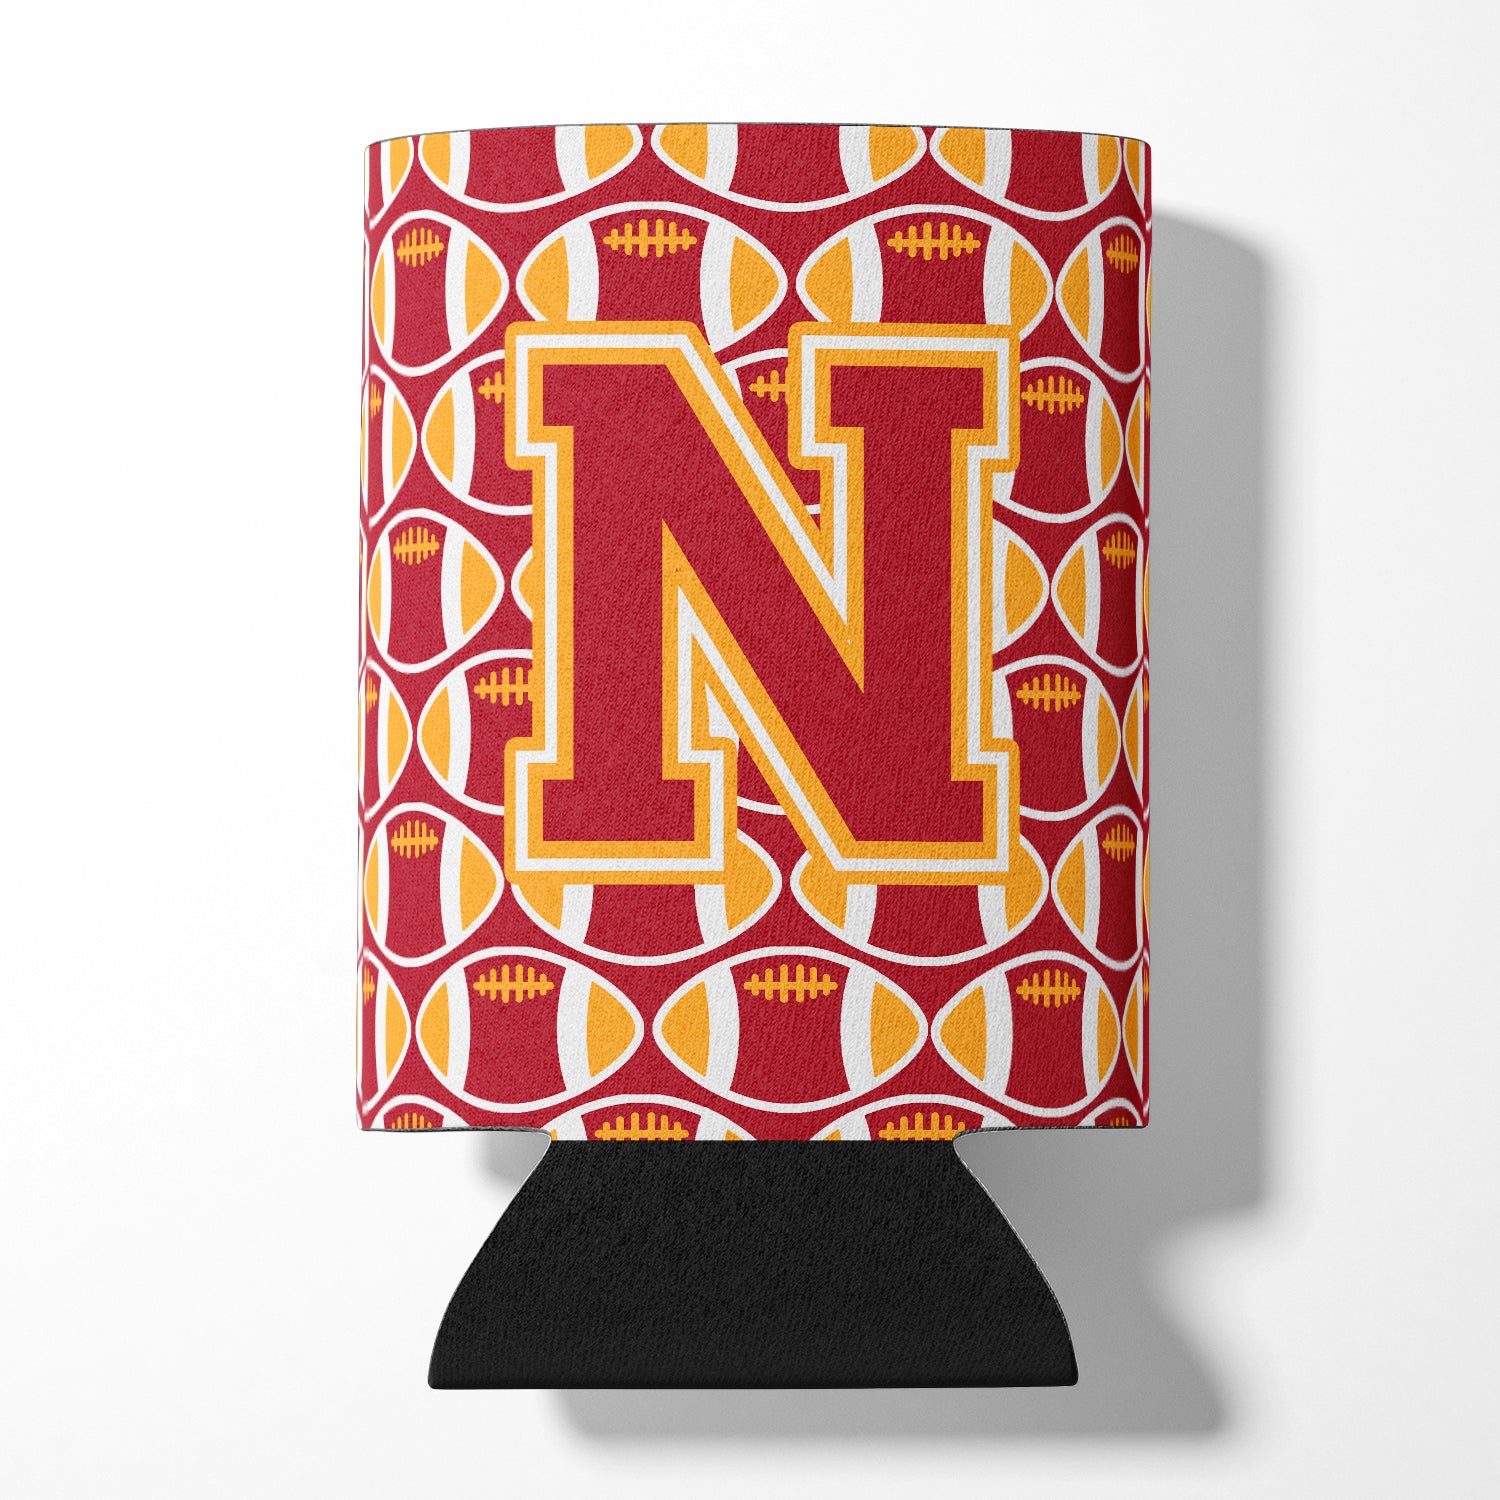 Letter N Football Cardinal and Gold Can or Bottle Hugger CJ1070-NCC